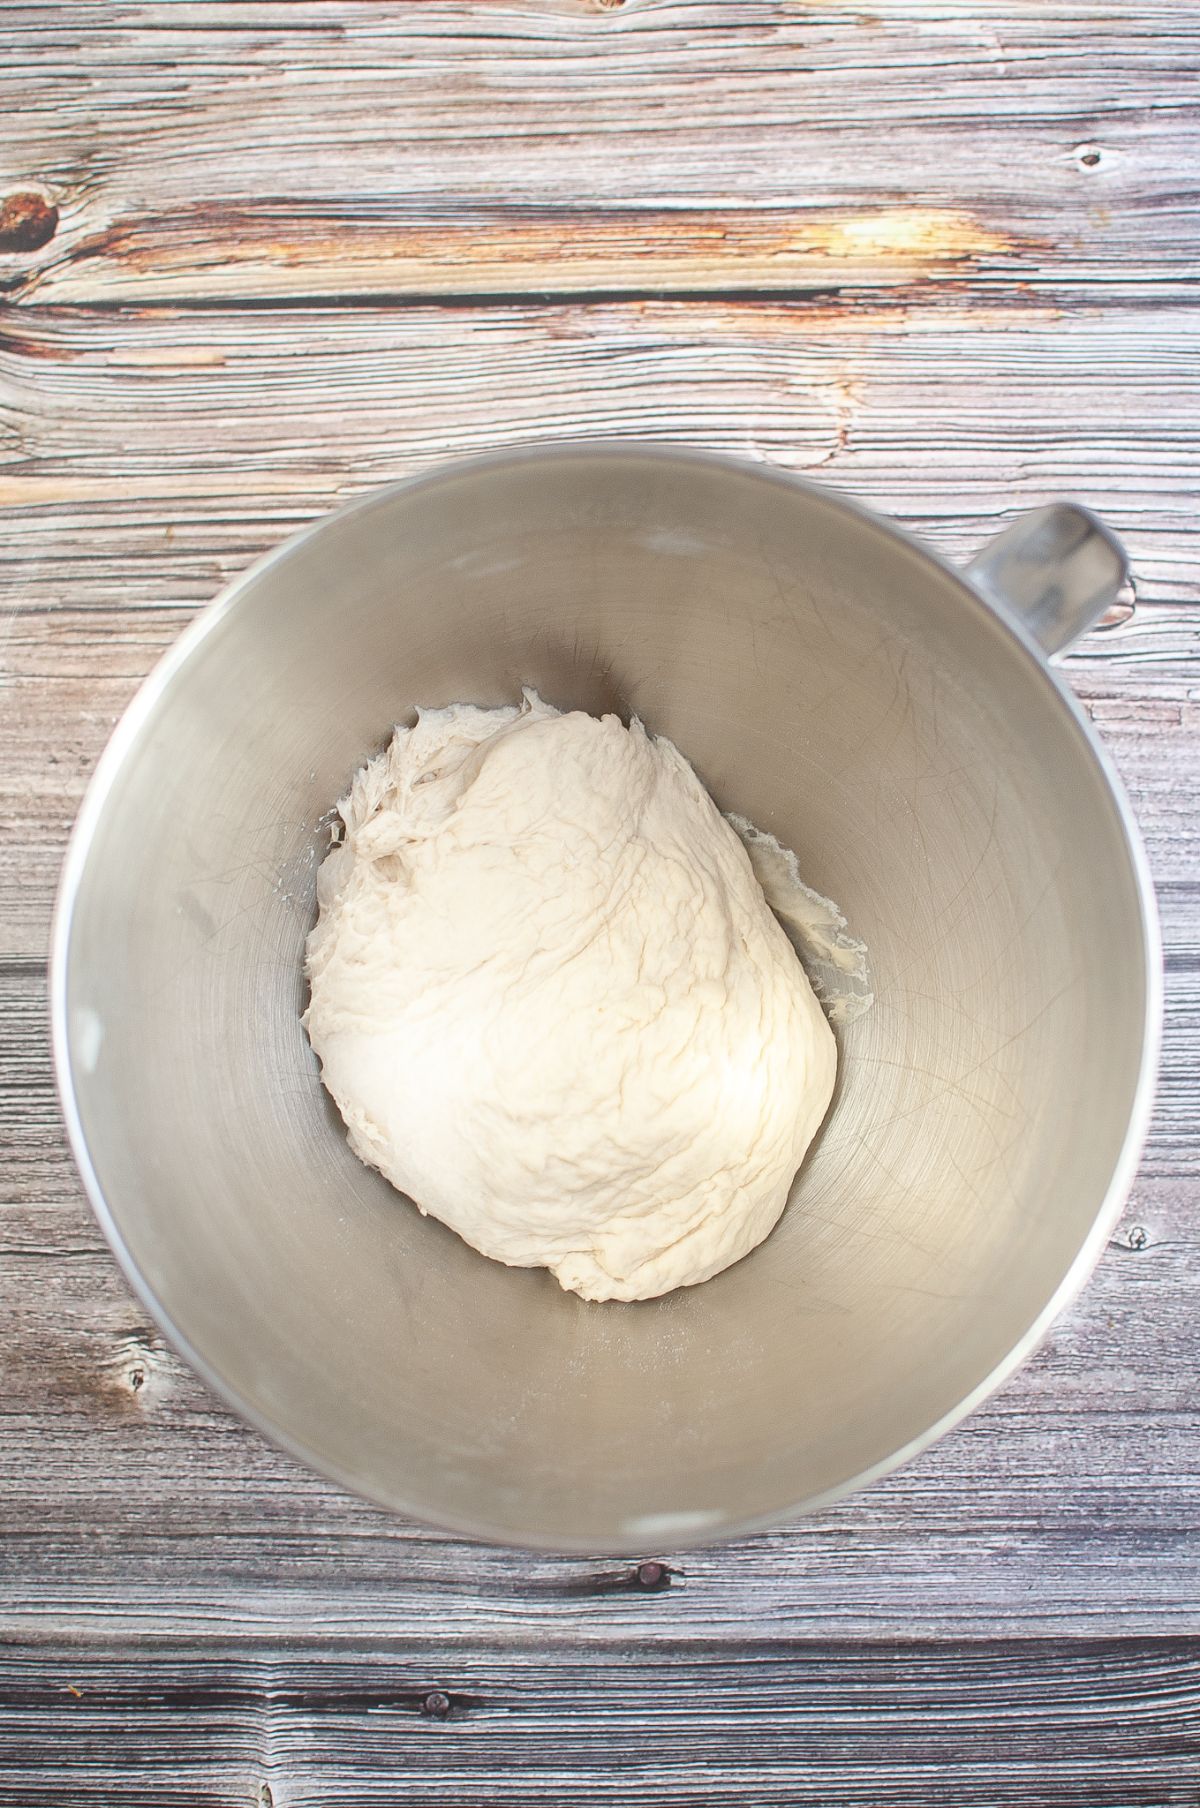 Doubled size dough in a mixing bowl.